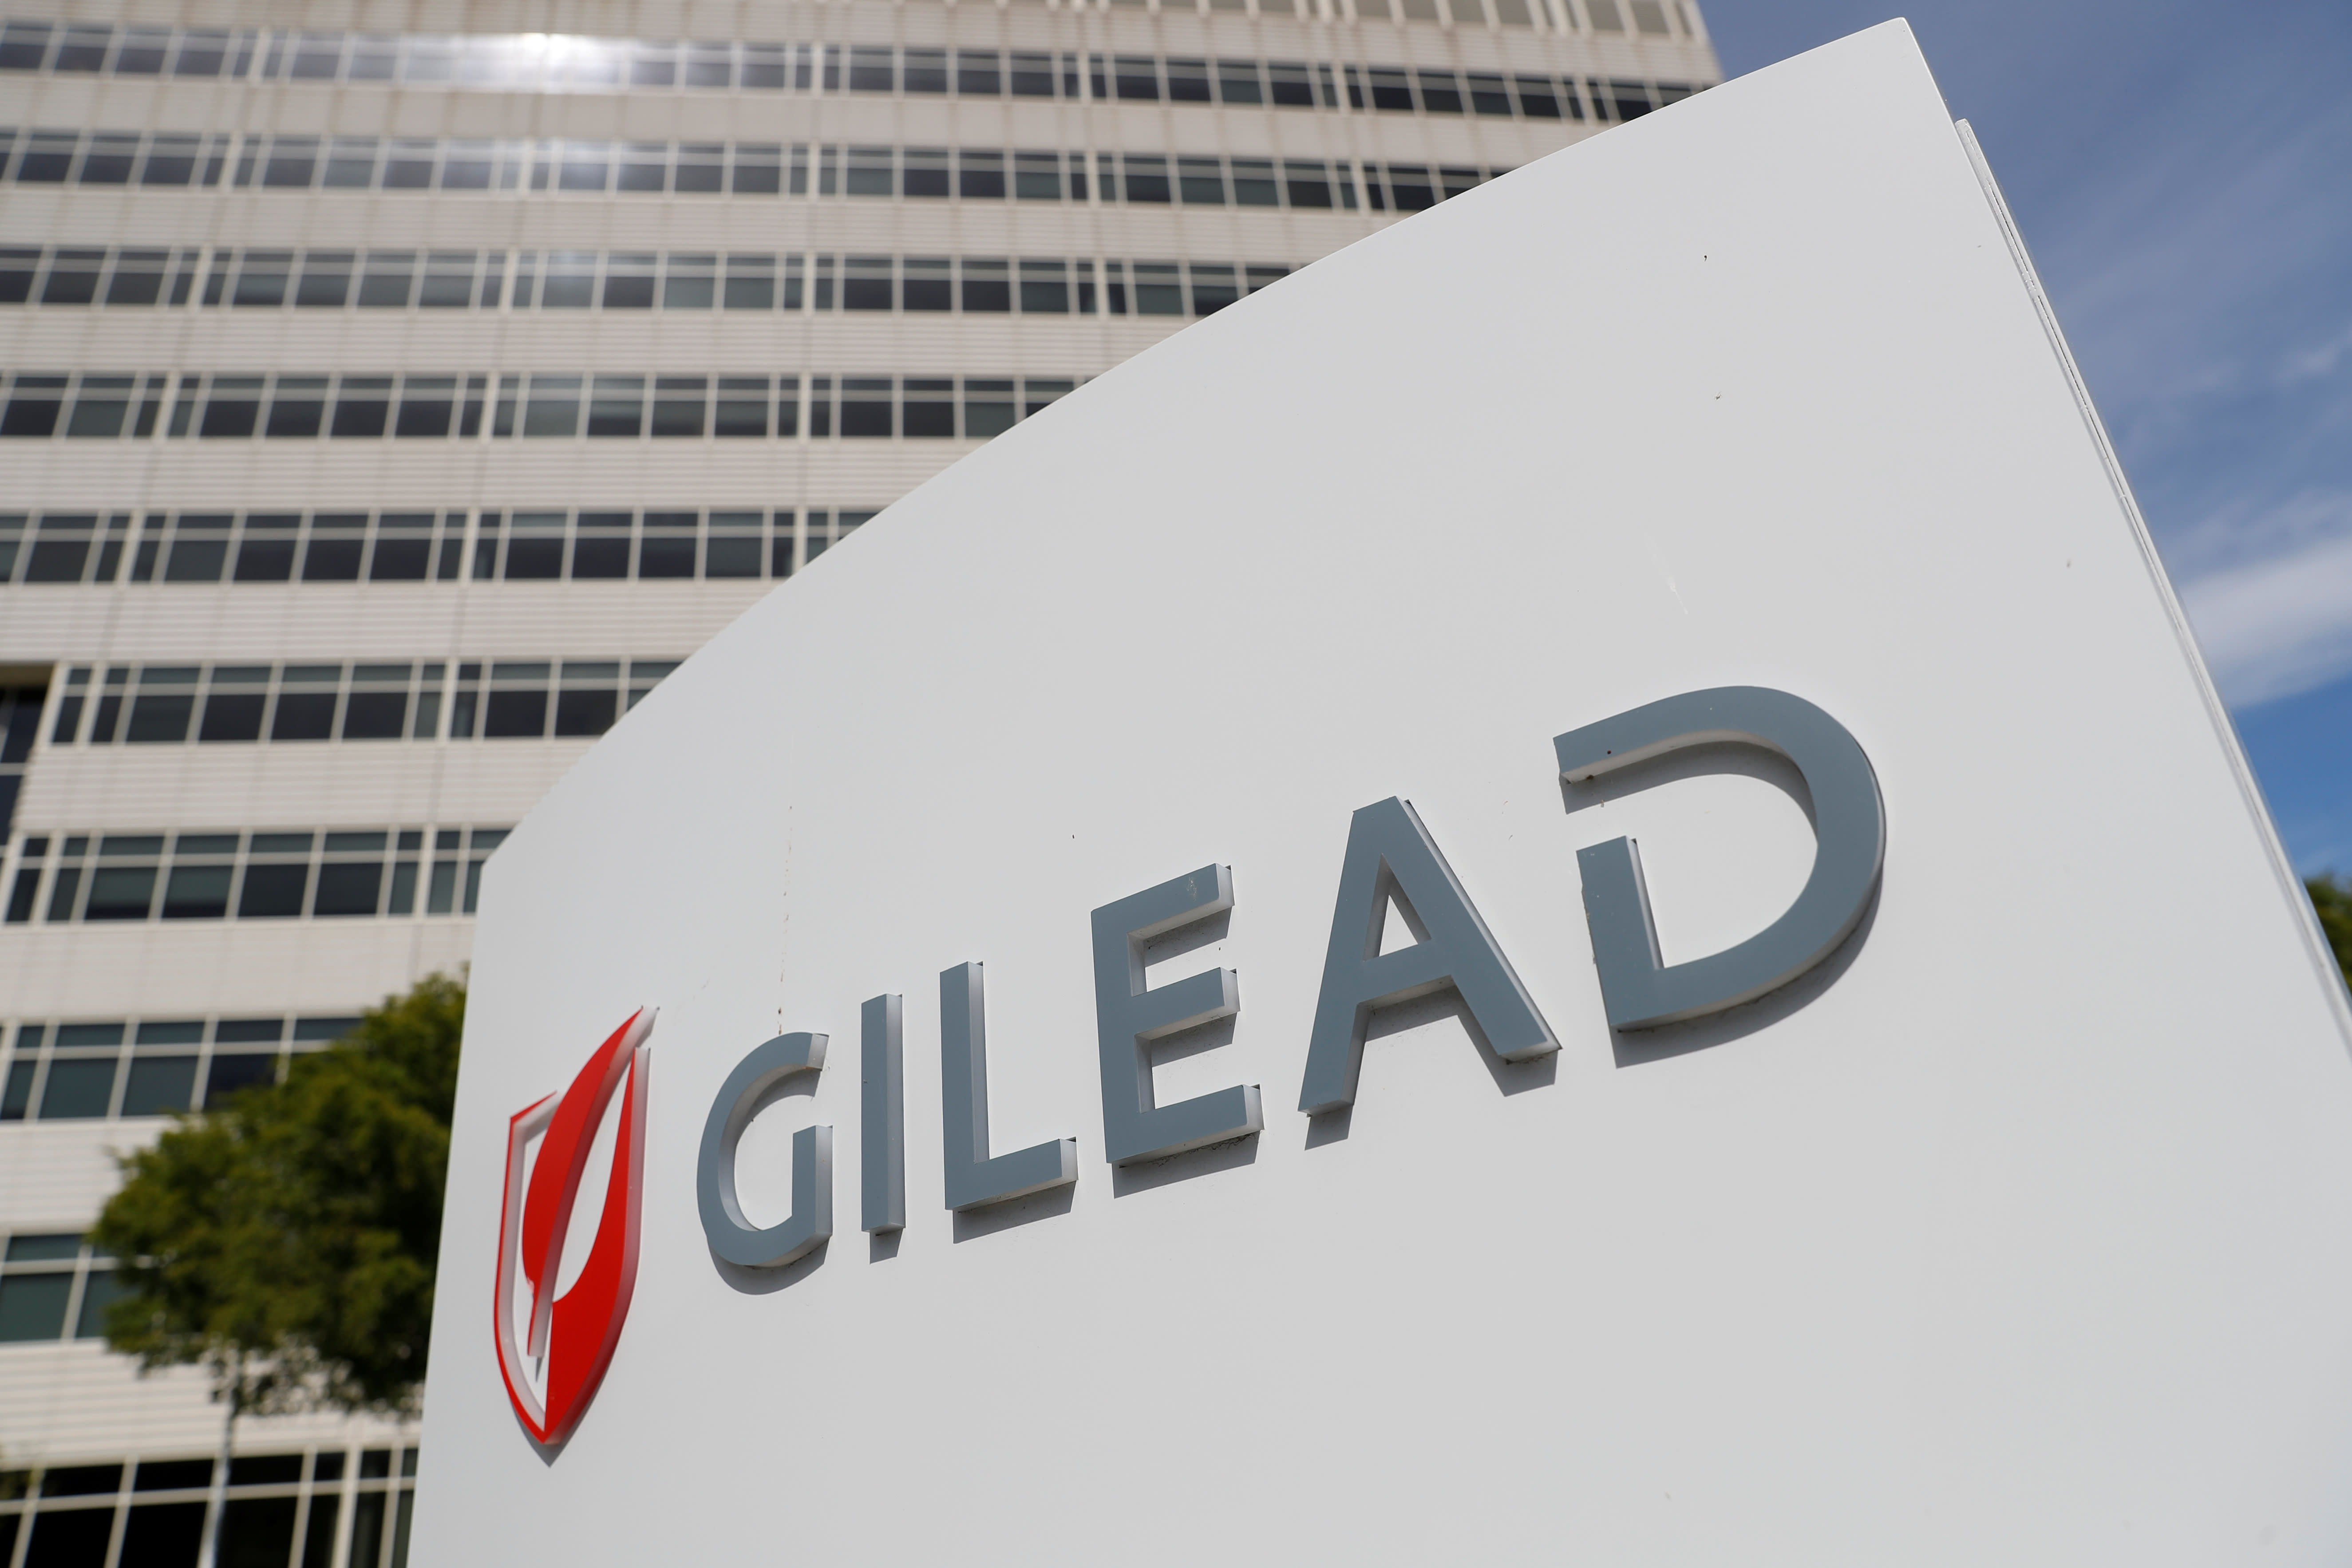 JPMorgan upgrades Gilead Sciences, says undervalued stock can rally nearly 30% from here